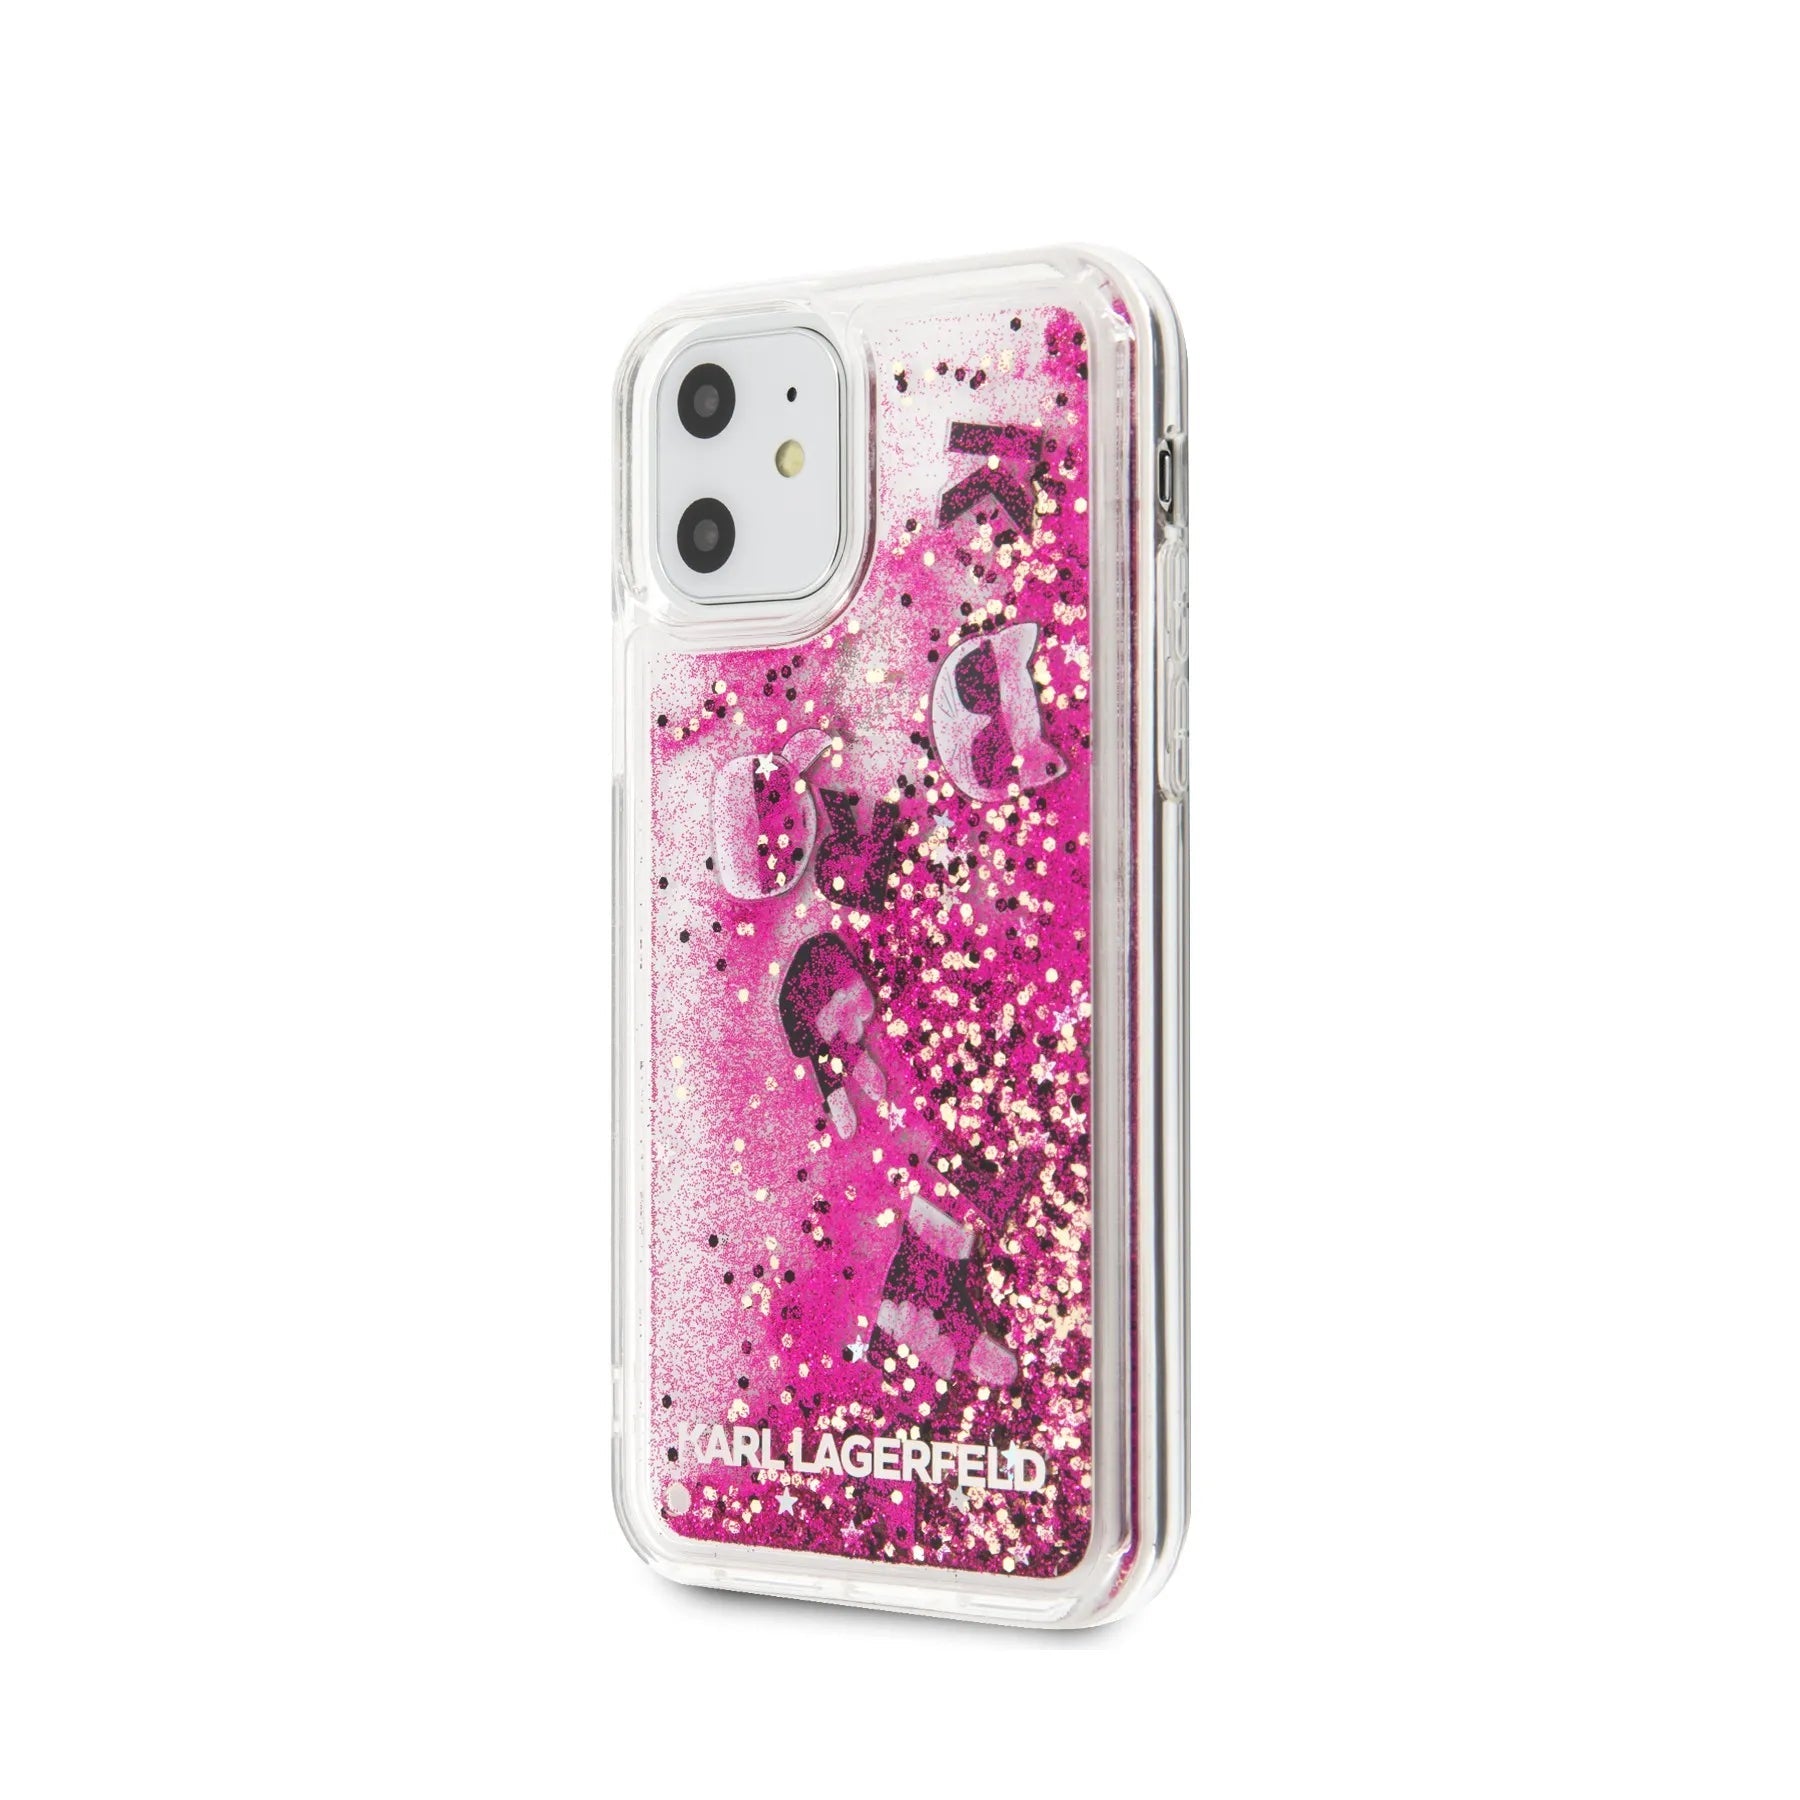 Coque Karl Lagerfeld pour iPhone 11 - My Store